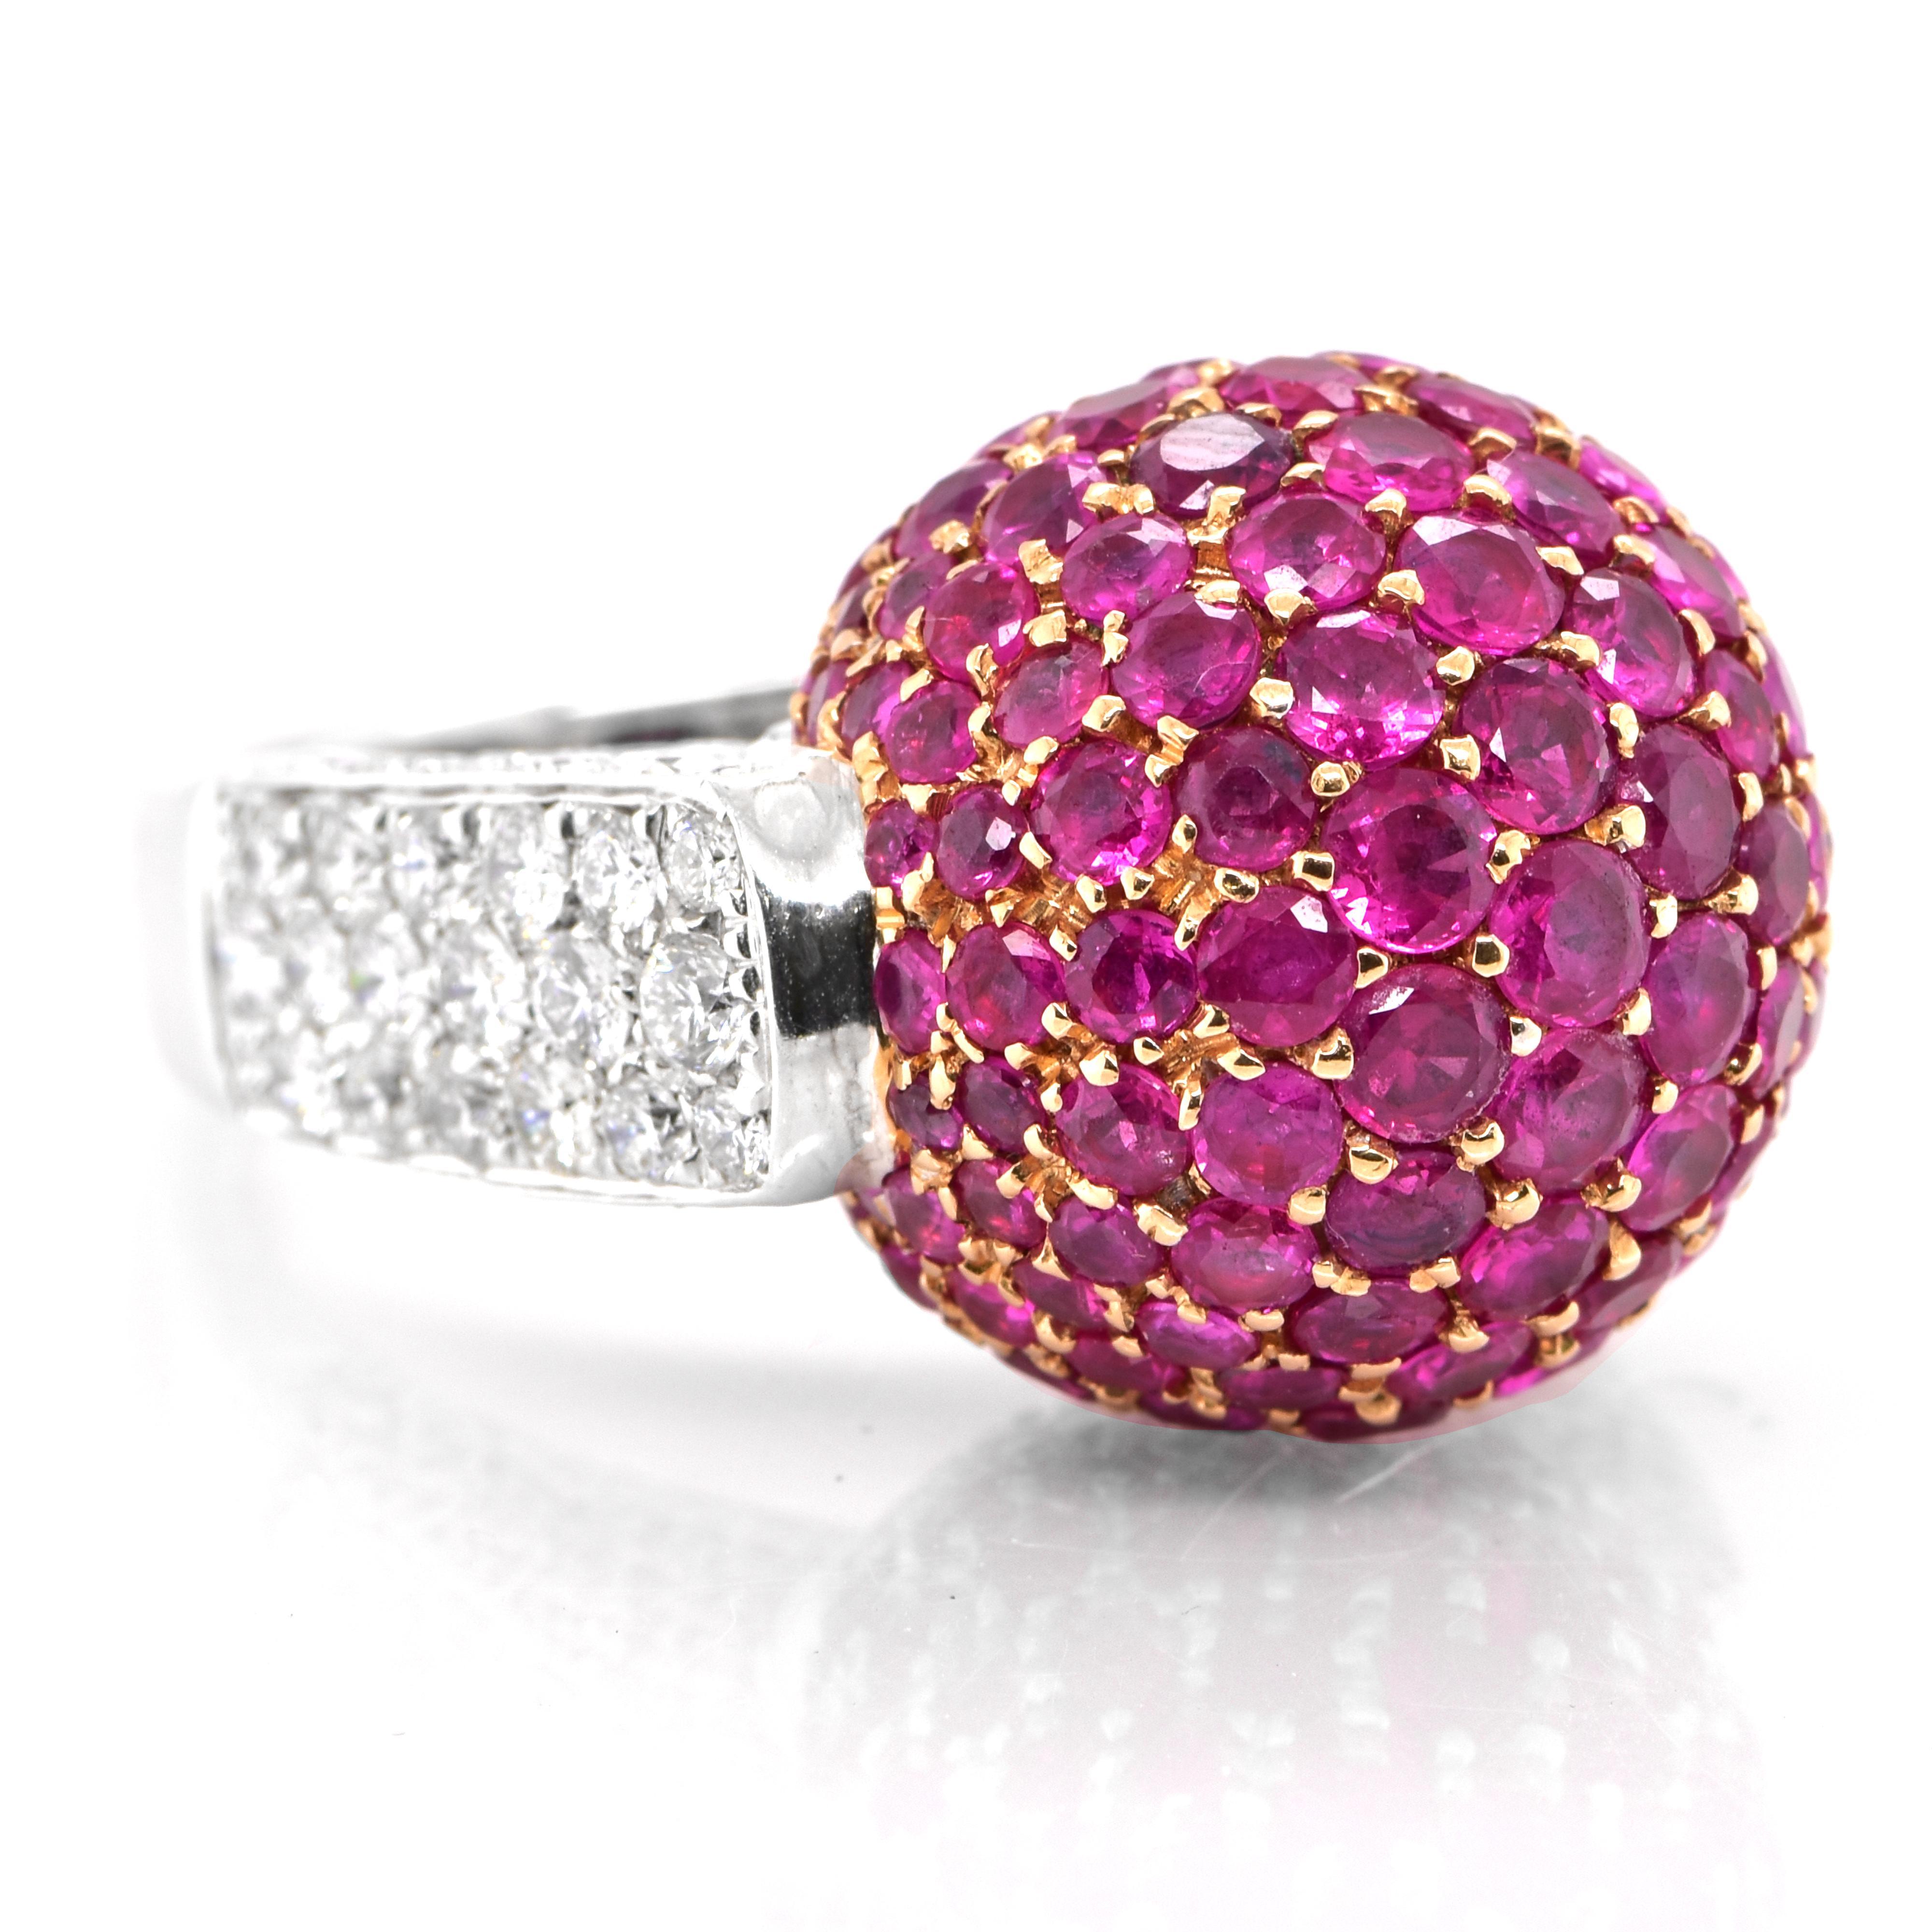 Modern 5.86 Carat Ruby and Diamond Cocktail Ring Made in 18 Karat Gold For Sale